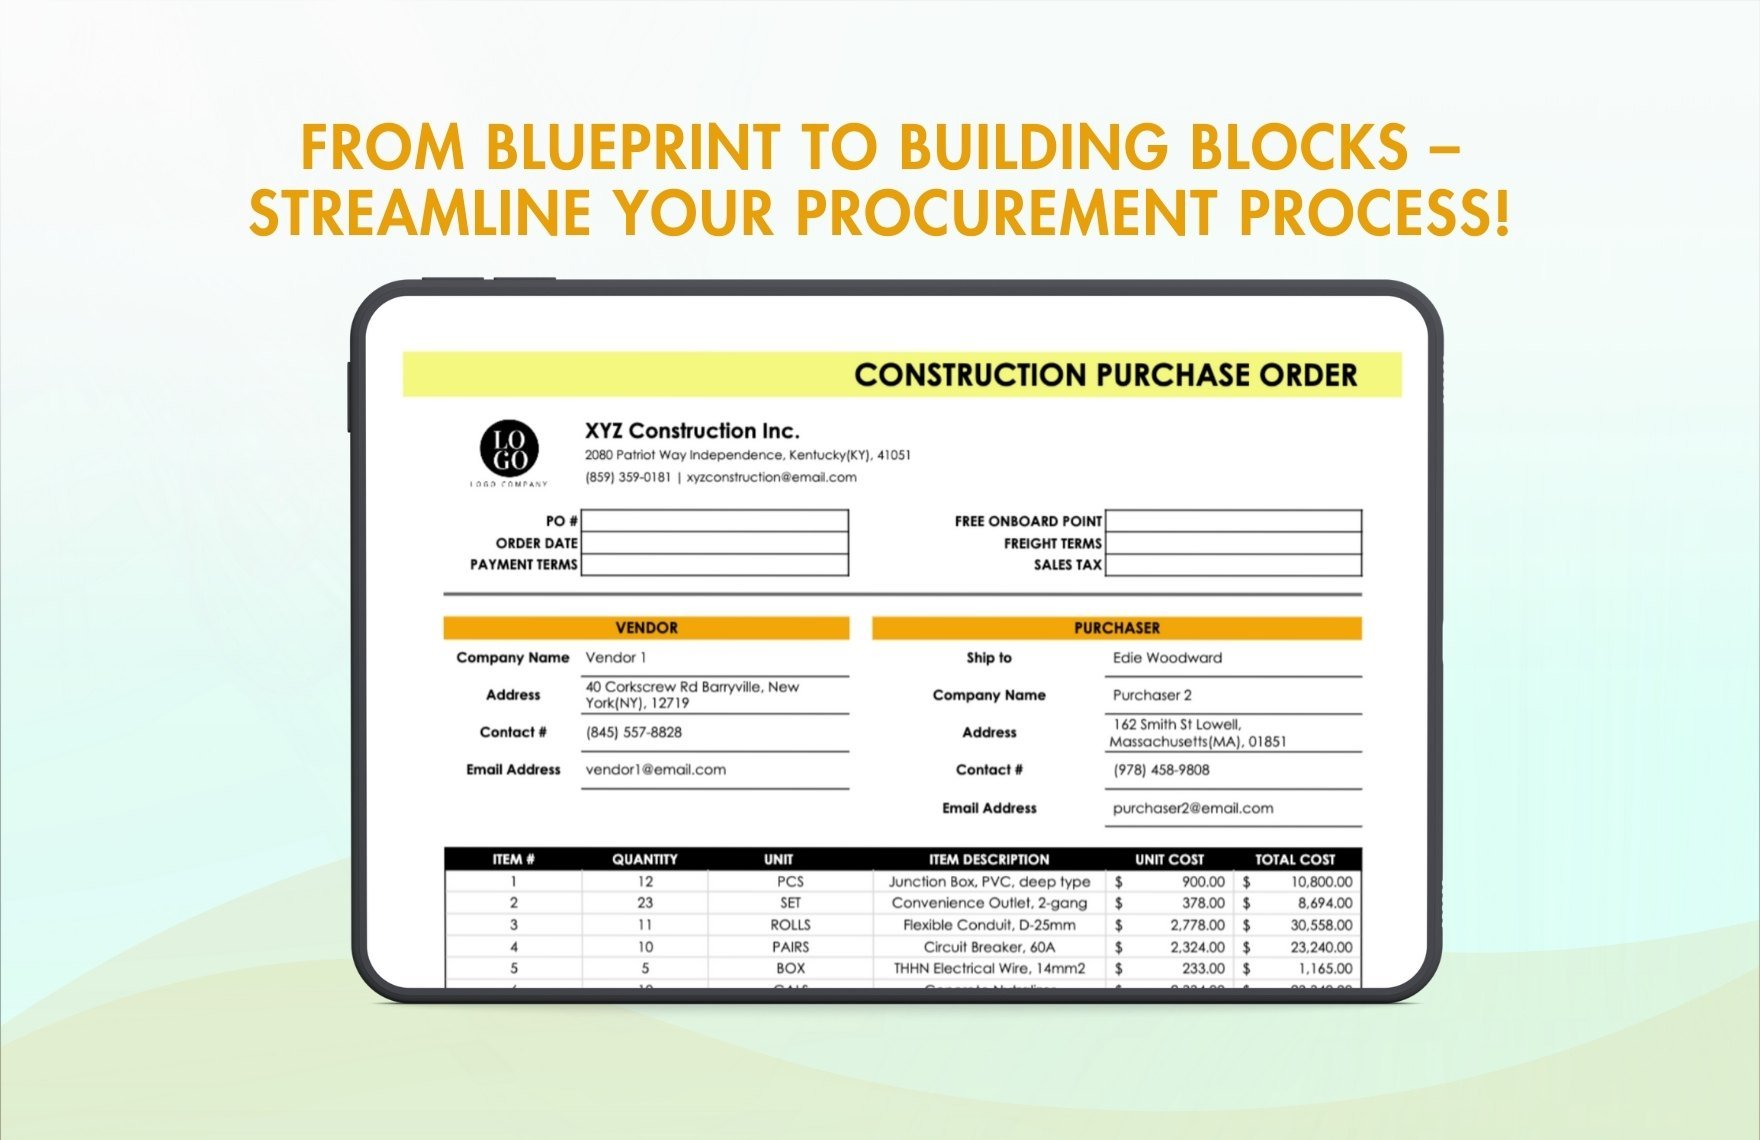 Construction Purchase Order Template